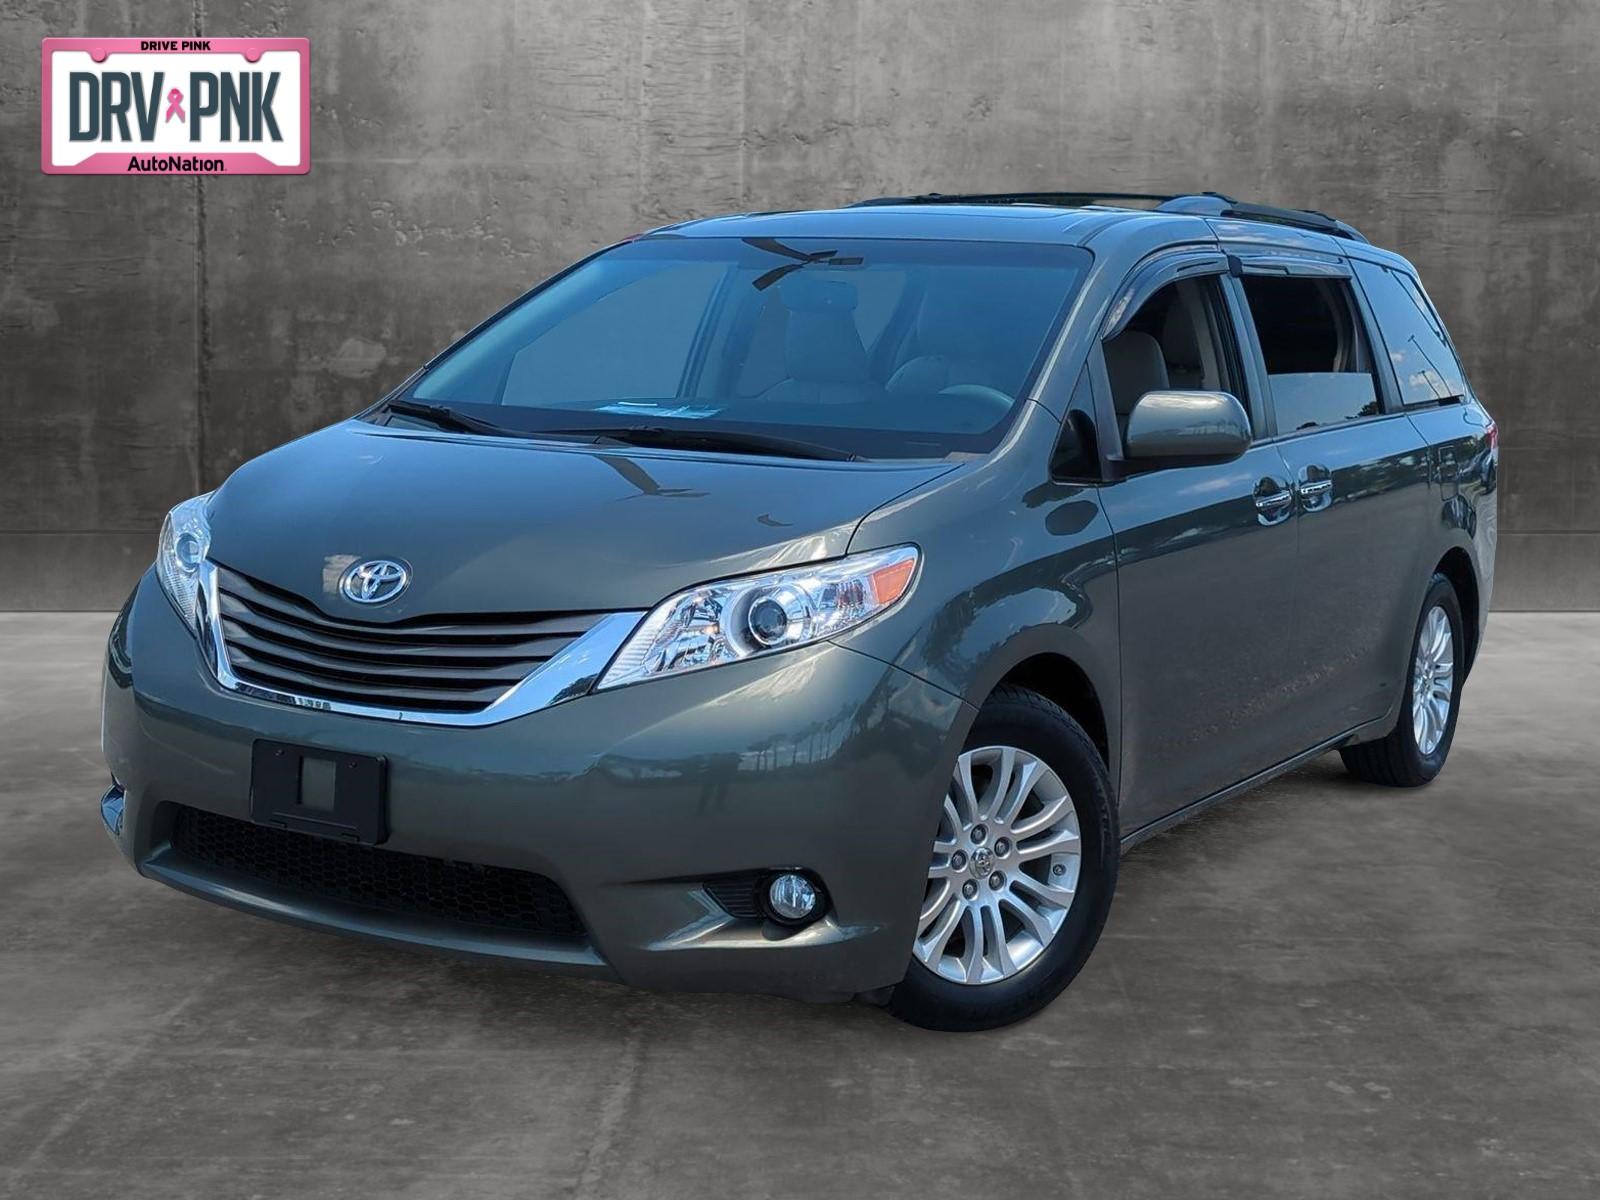 2014 Toyota Sienna Vehicle Photo in Ft. Myers, FL 33907